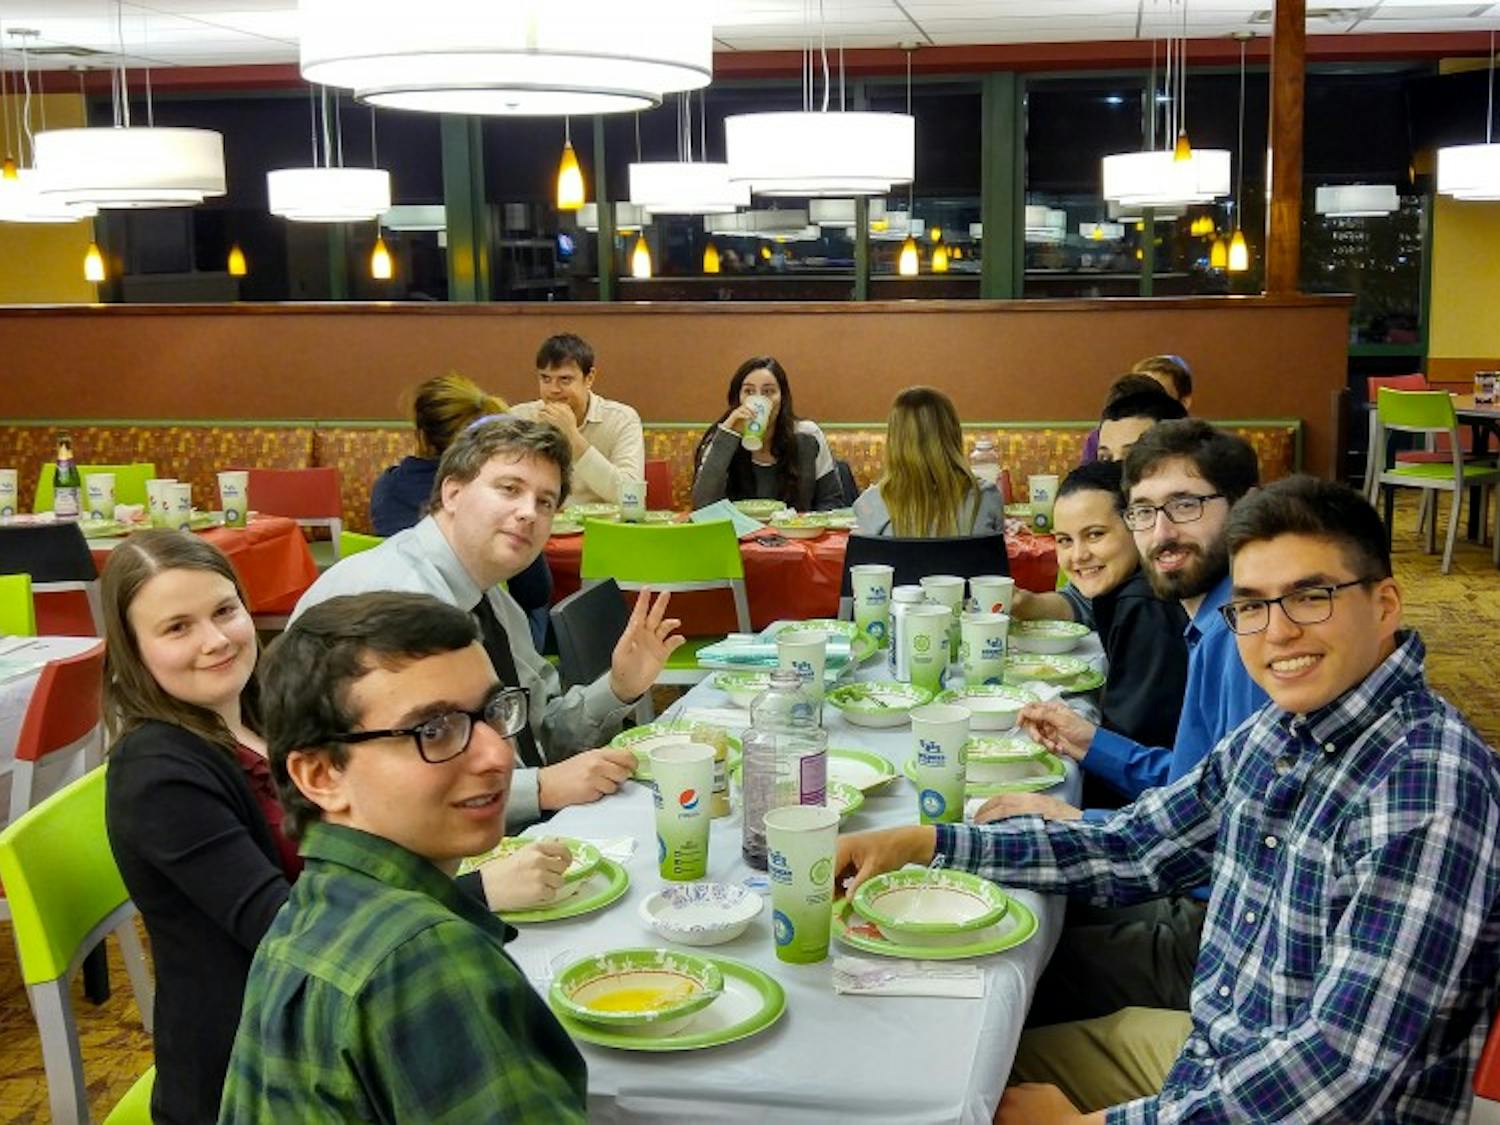 Students observe Passover together.&nbsp;Hillel of Buffalo hosted Passover Seder dinners on Friday and Saturday night in Pistachios in the Student Union. Seder dinners mark the start of Passover, a Jewish holiday.